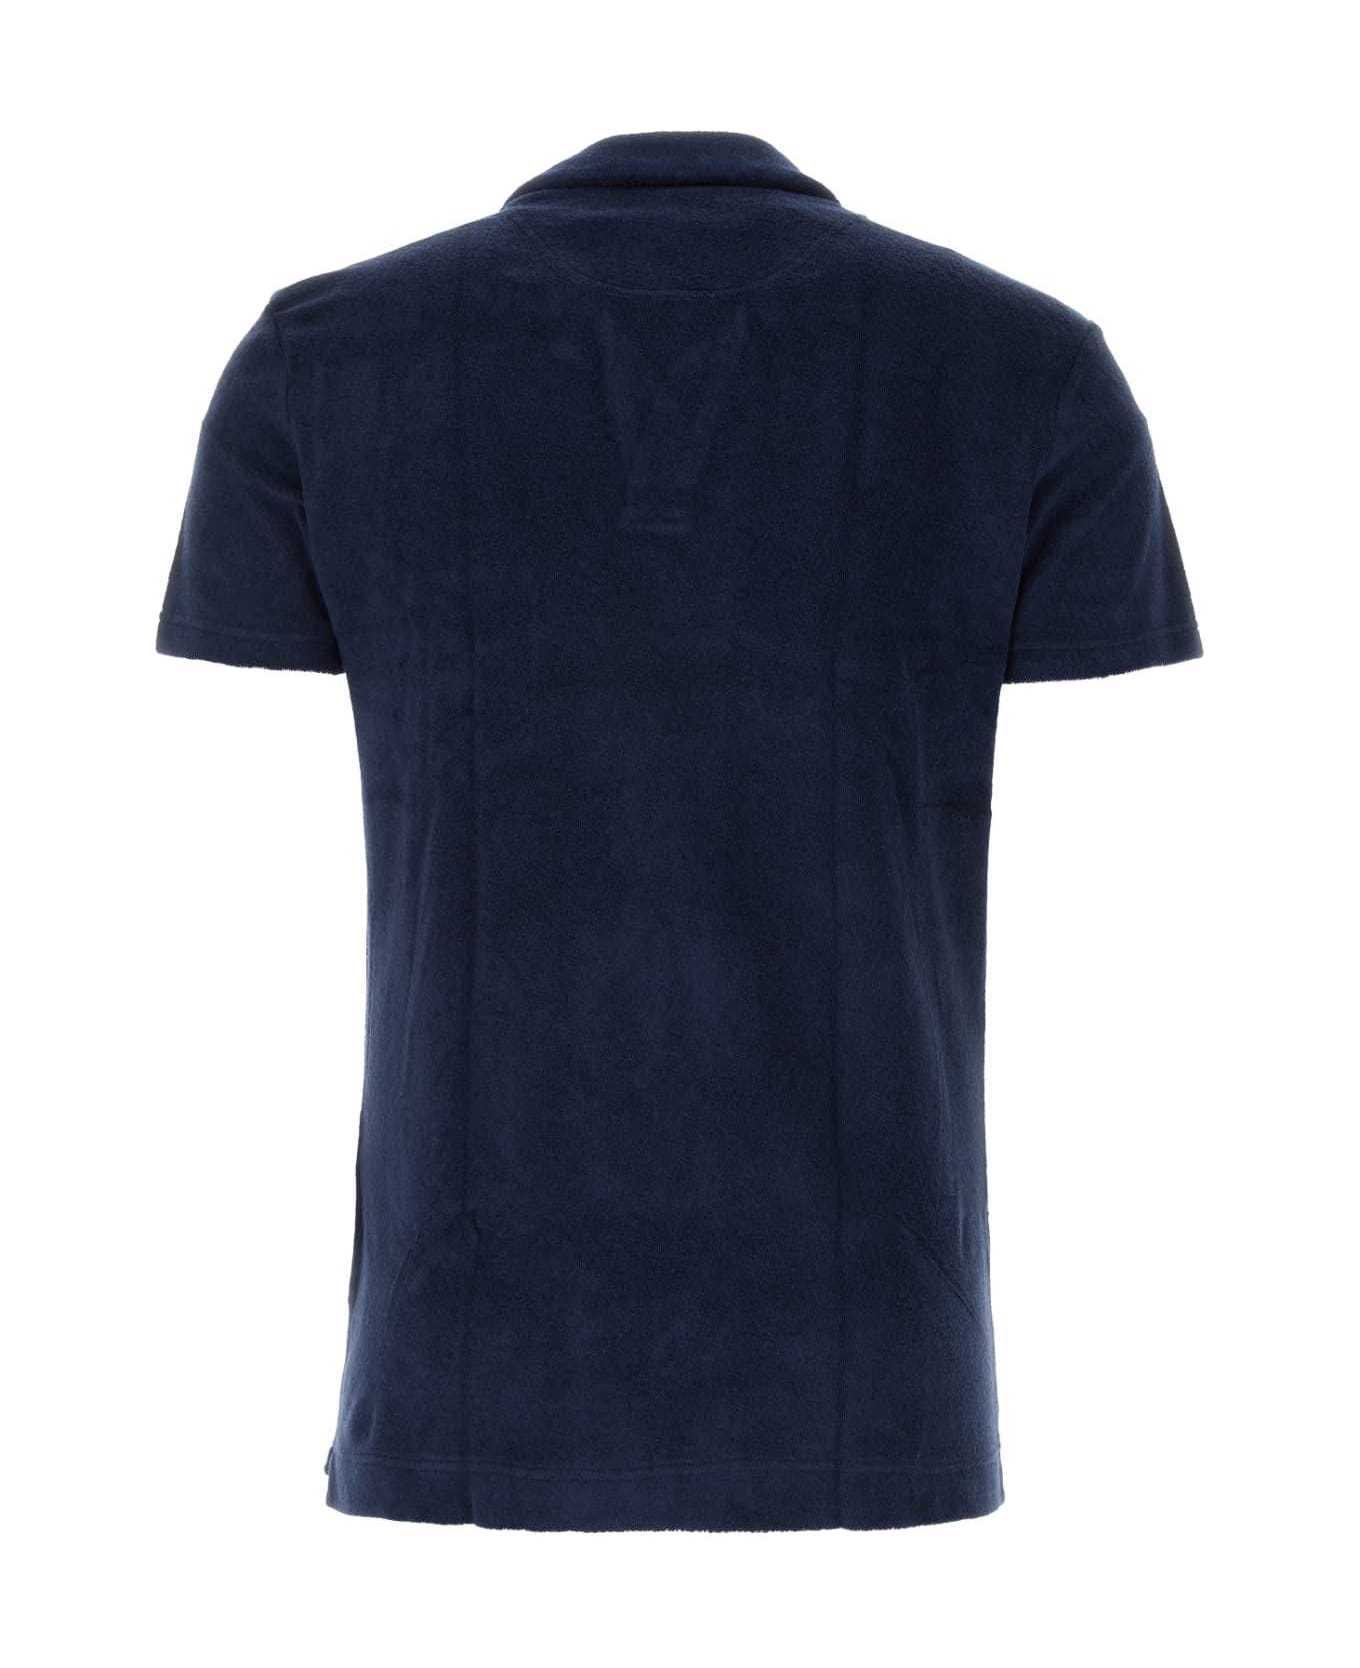 Orlebar Brown Navy Blue Terry Fabric Terry Polo Shirt - NAVY